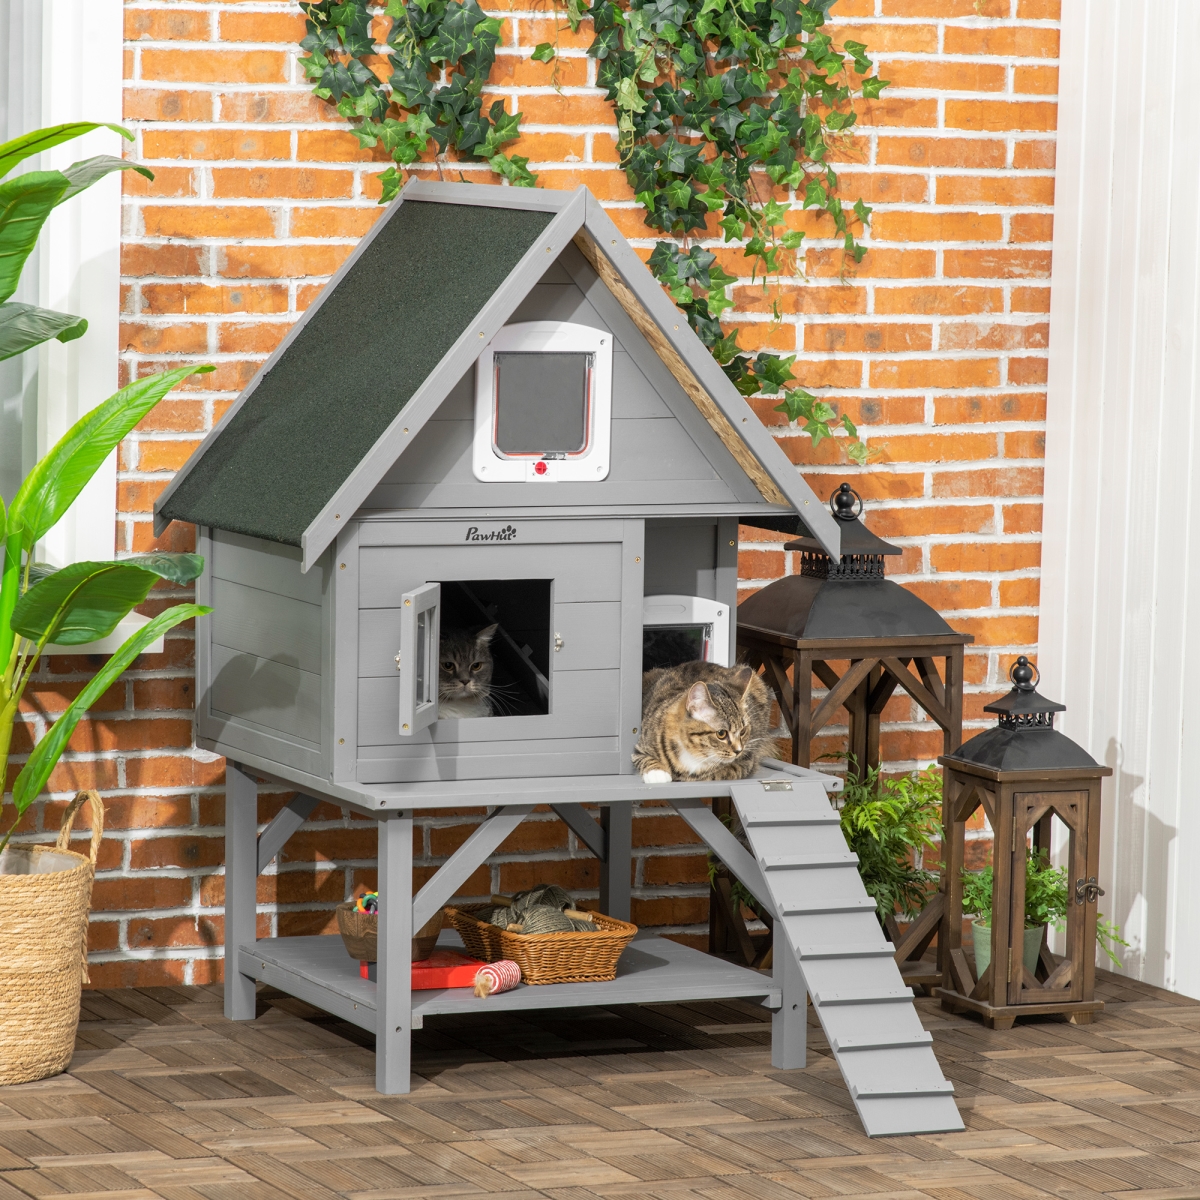 Picture of 212 Main D30-672V00CG 31.75 x 29.25 x 48 in. Pawhut Wooden Outdoor Cat House with Escape Door for 1-2 Feral Cats with Asphalt Roof&#44; Balcony & Stair - Dolphin Gray & Moss Green